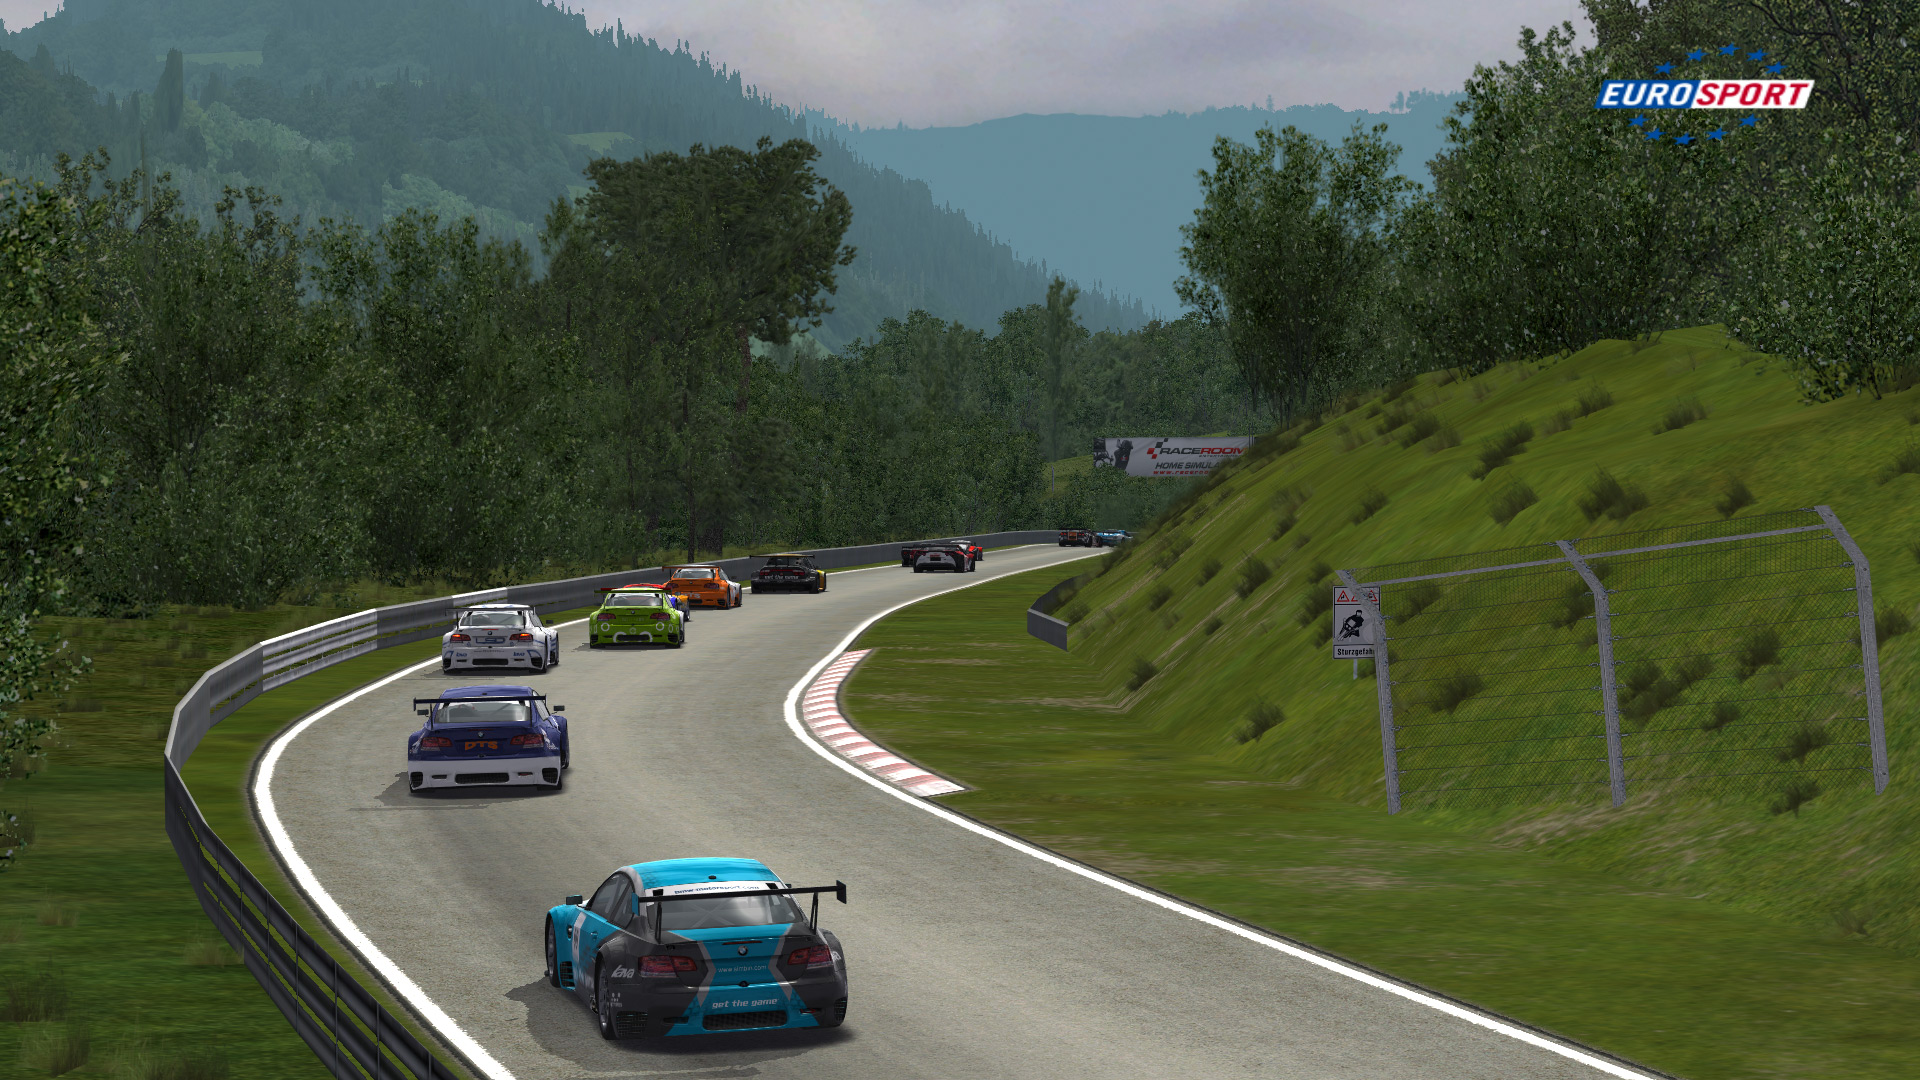 Race07-Graphic-and-Shaders-Playground-Nordschleife-2.jpg